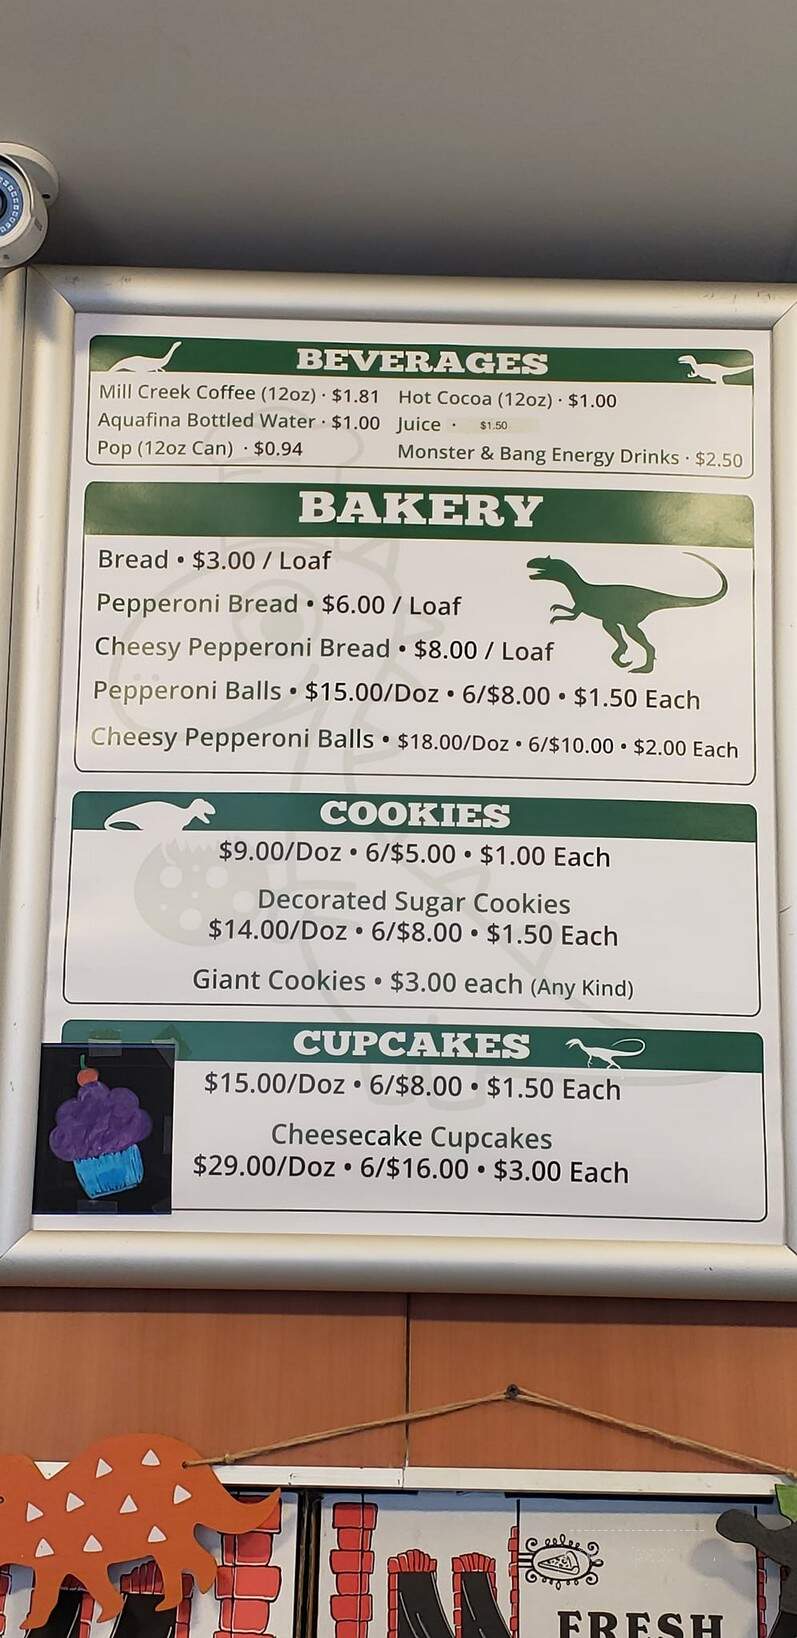 Rex Brothers Bakery - Erie, PA